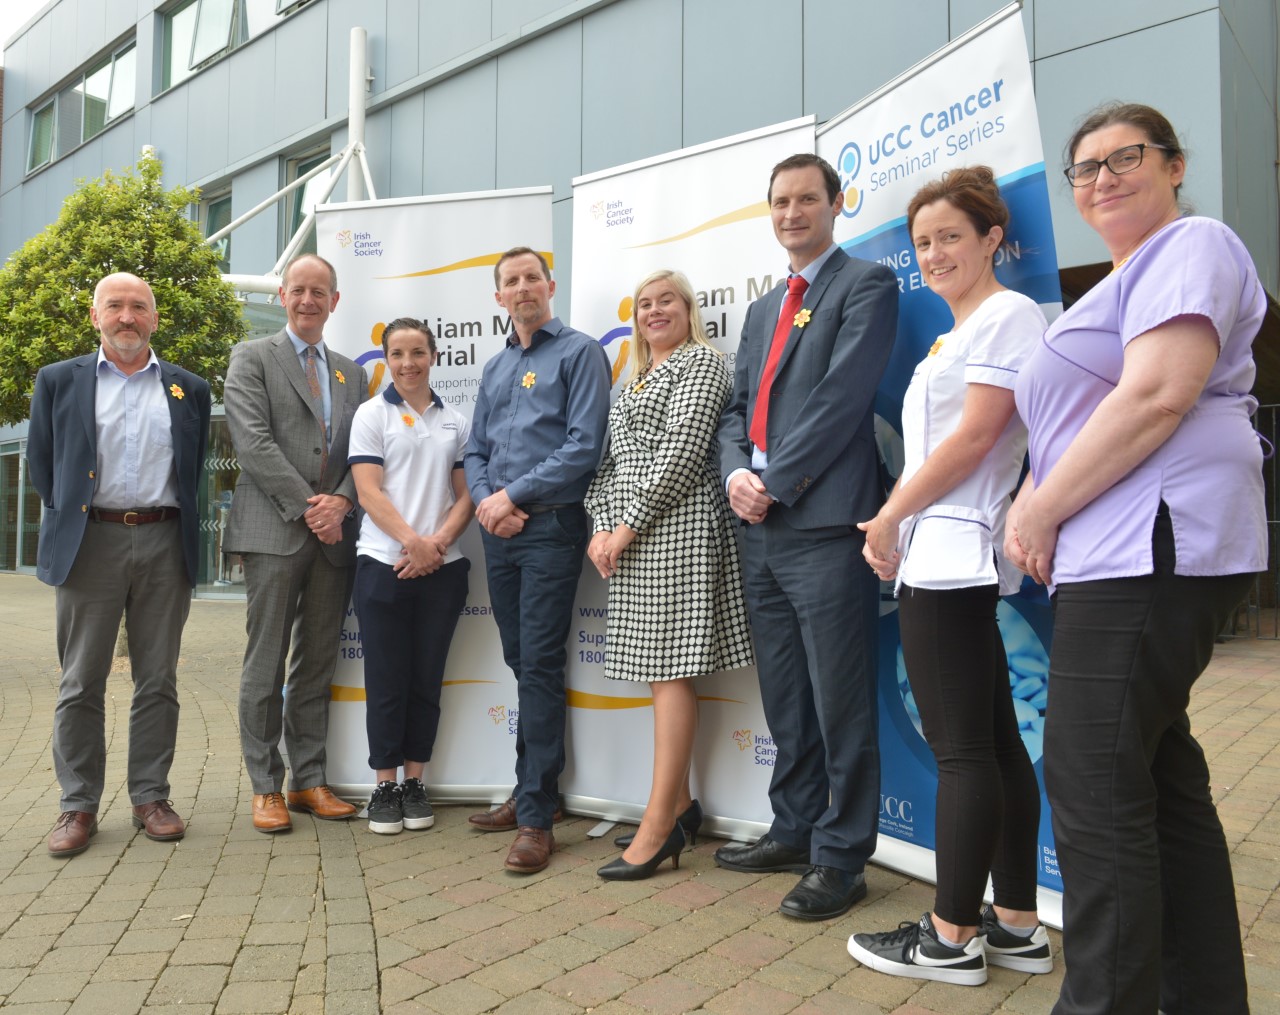 Irish Cancer Society Liam Mc Trial making a difference at Cork University Hospital 